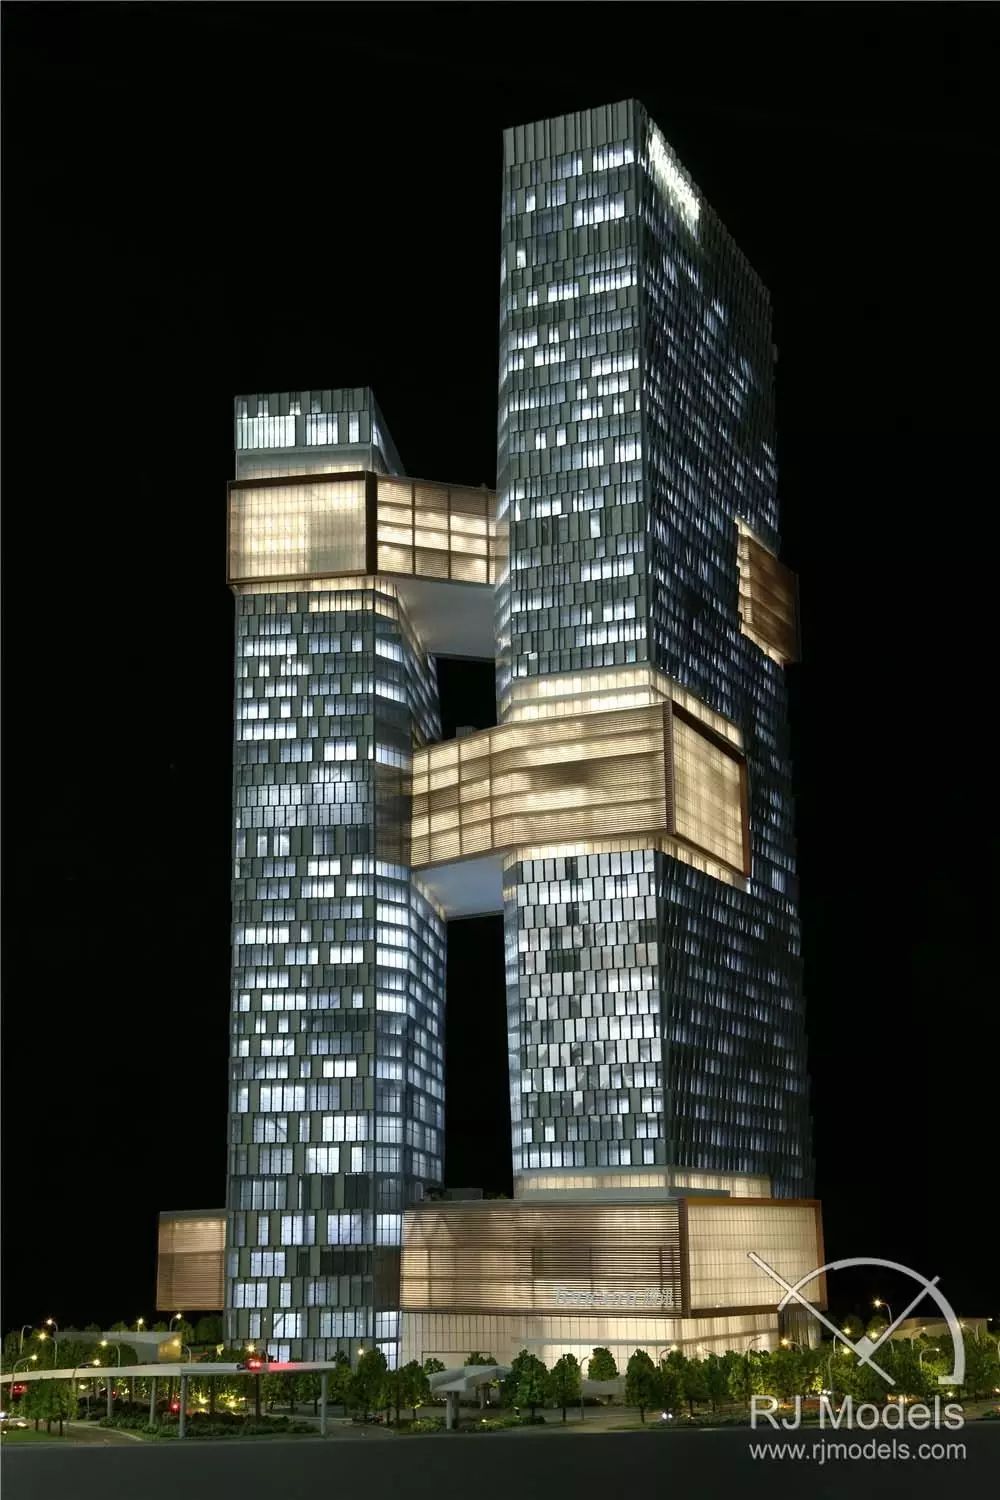 The Completion Photo of Tencent Building of Binhai architecture model